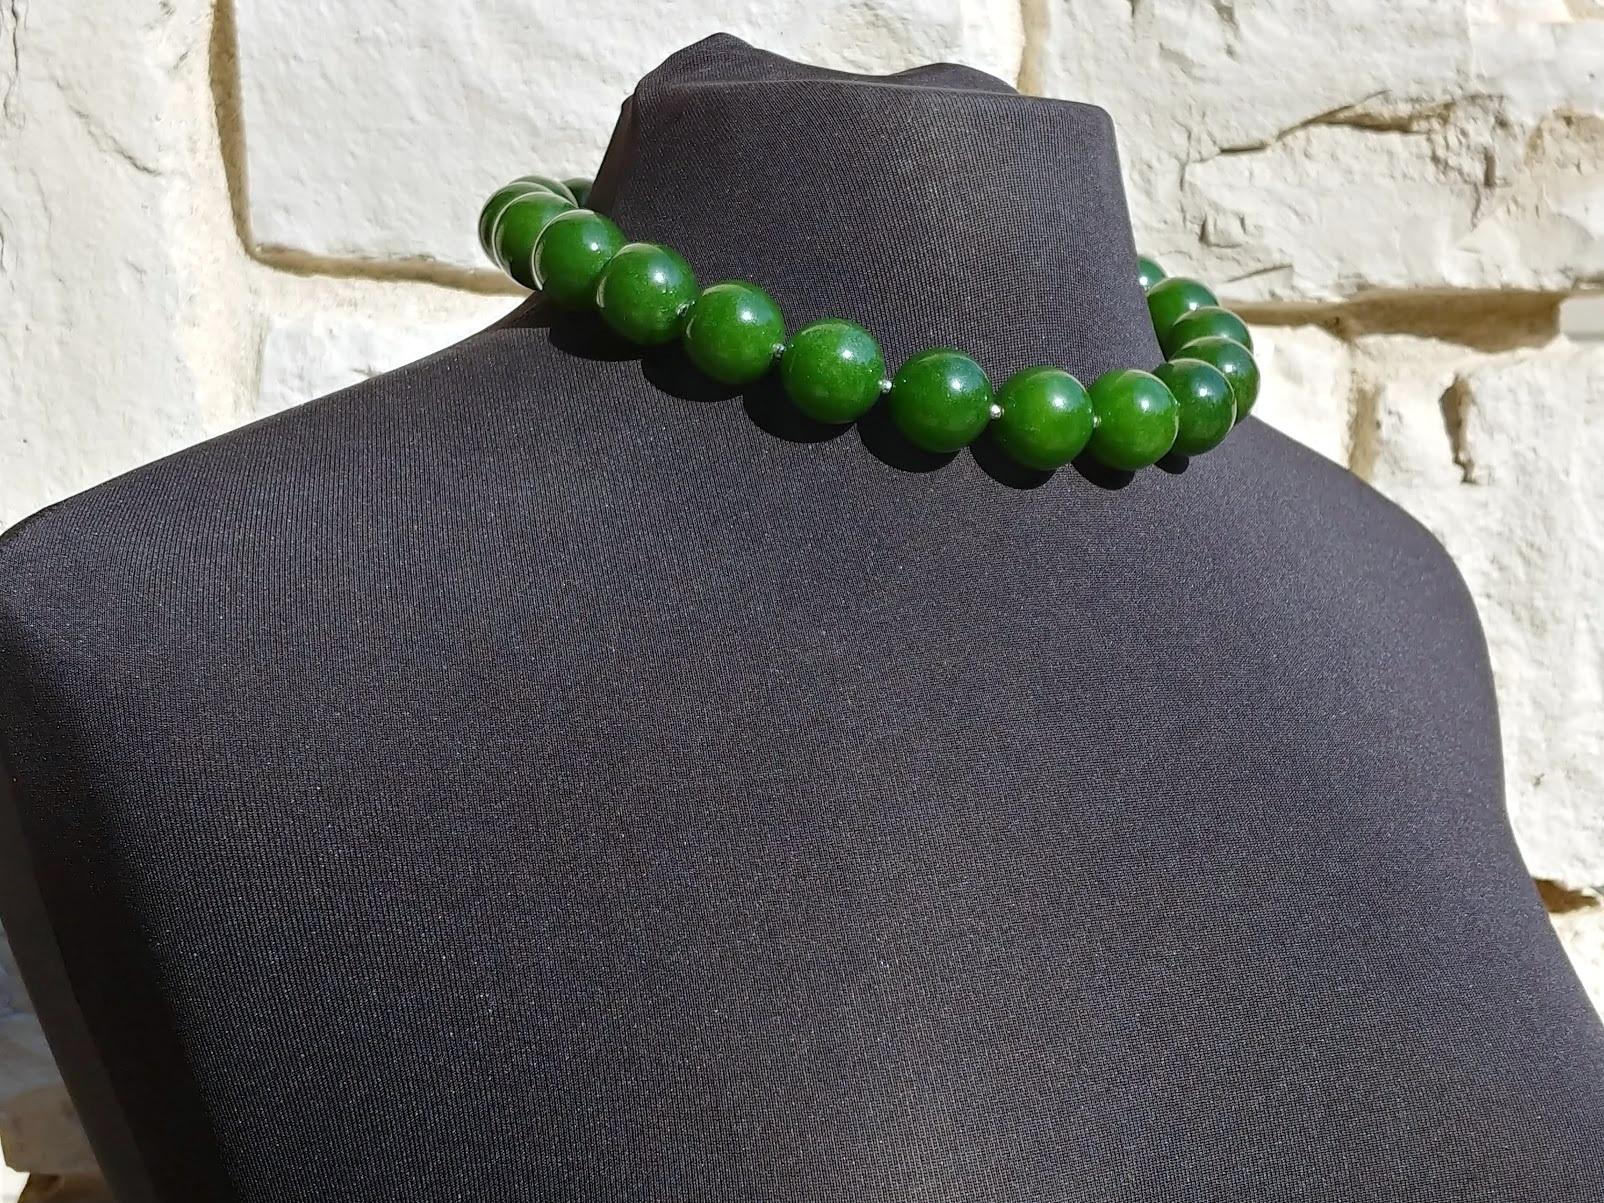 Taiwan Green Jasper Necklace with Rare Vintage Painted Glass Clasp In Excellent Condition For Sale In Chesterland, OH